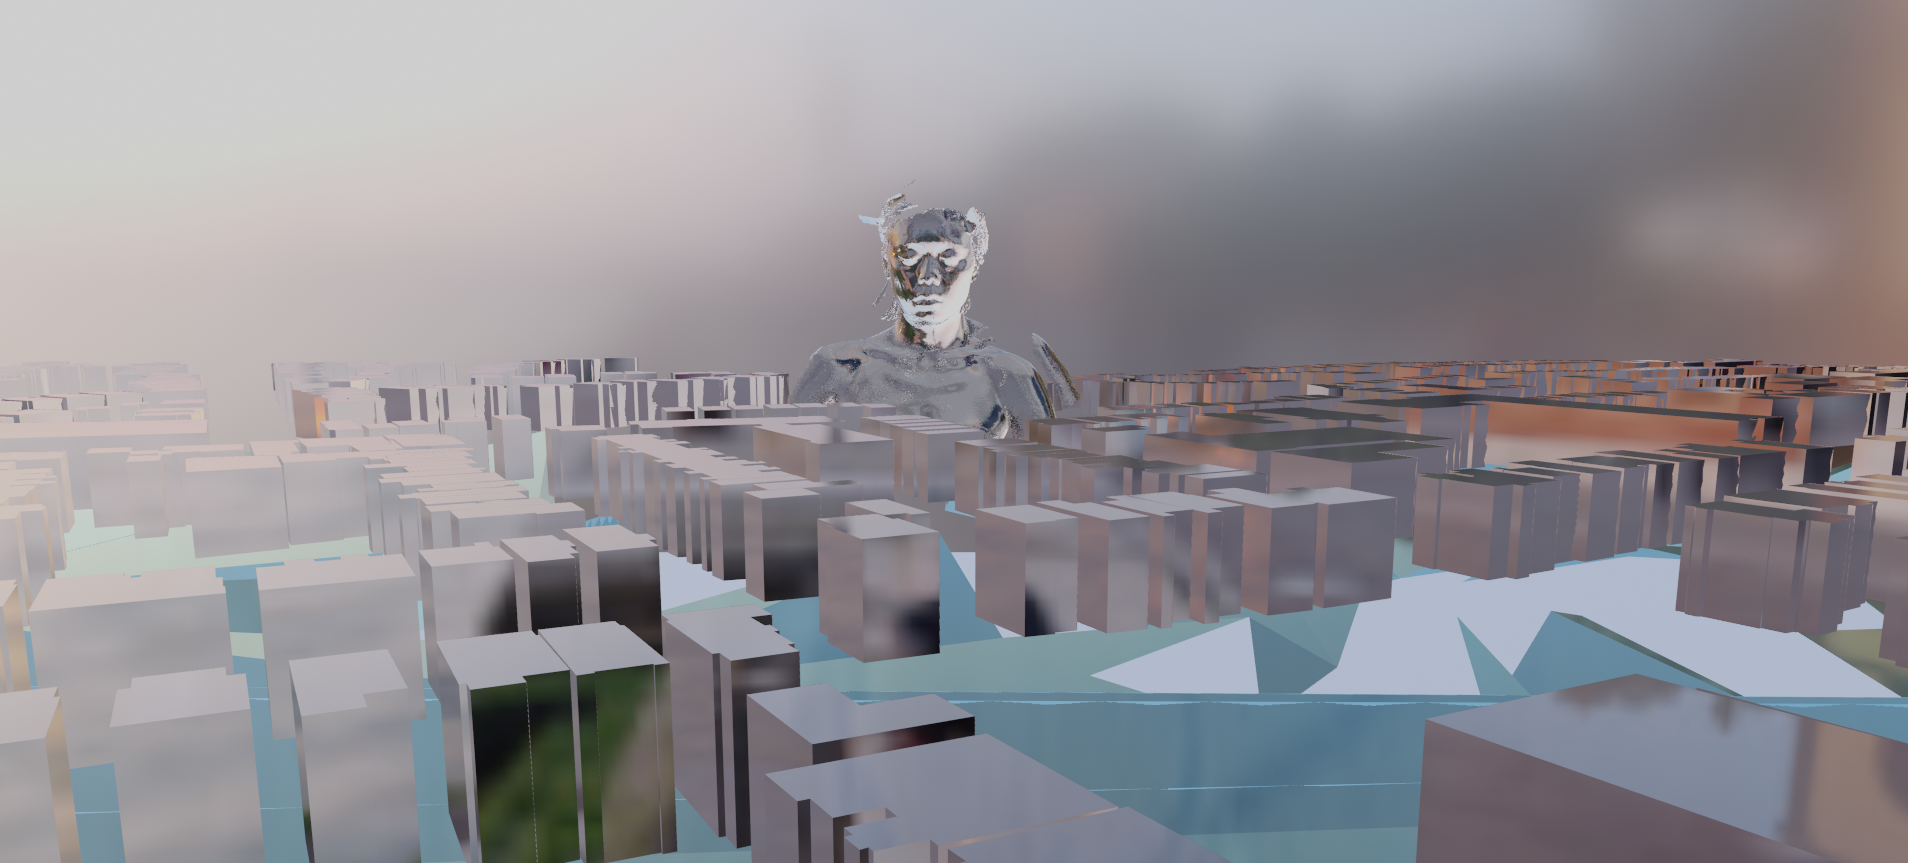 an image of a 3D space: arial view of a monochromatic city with a giant figure in the background